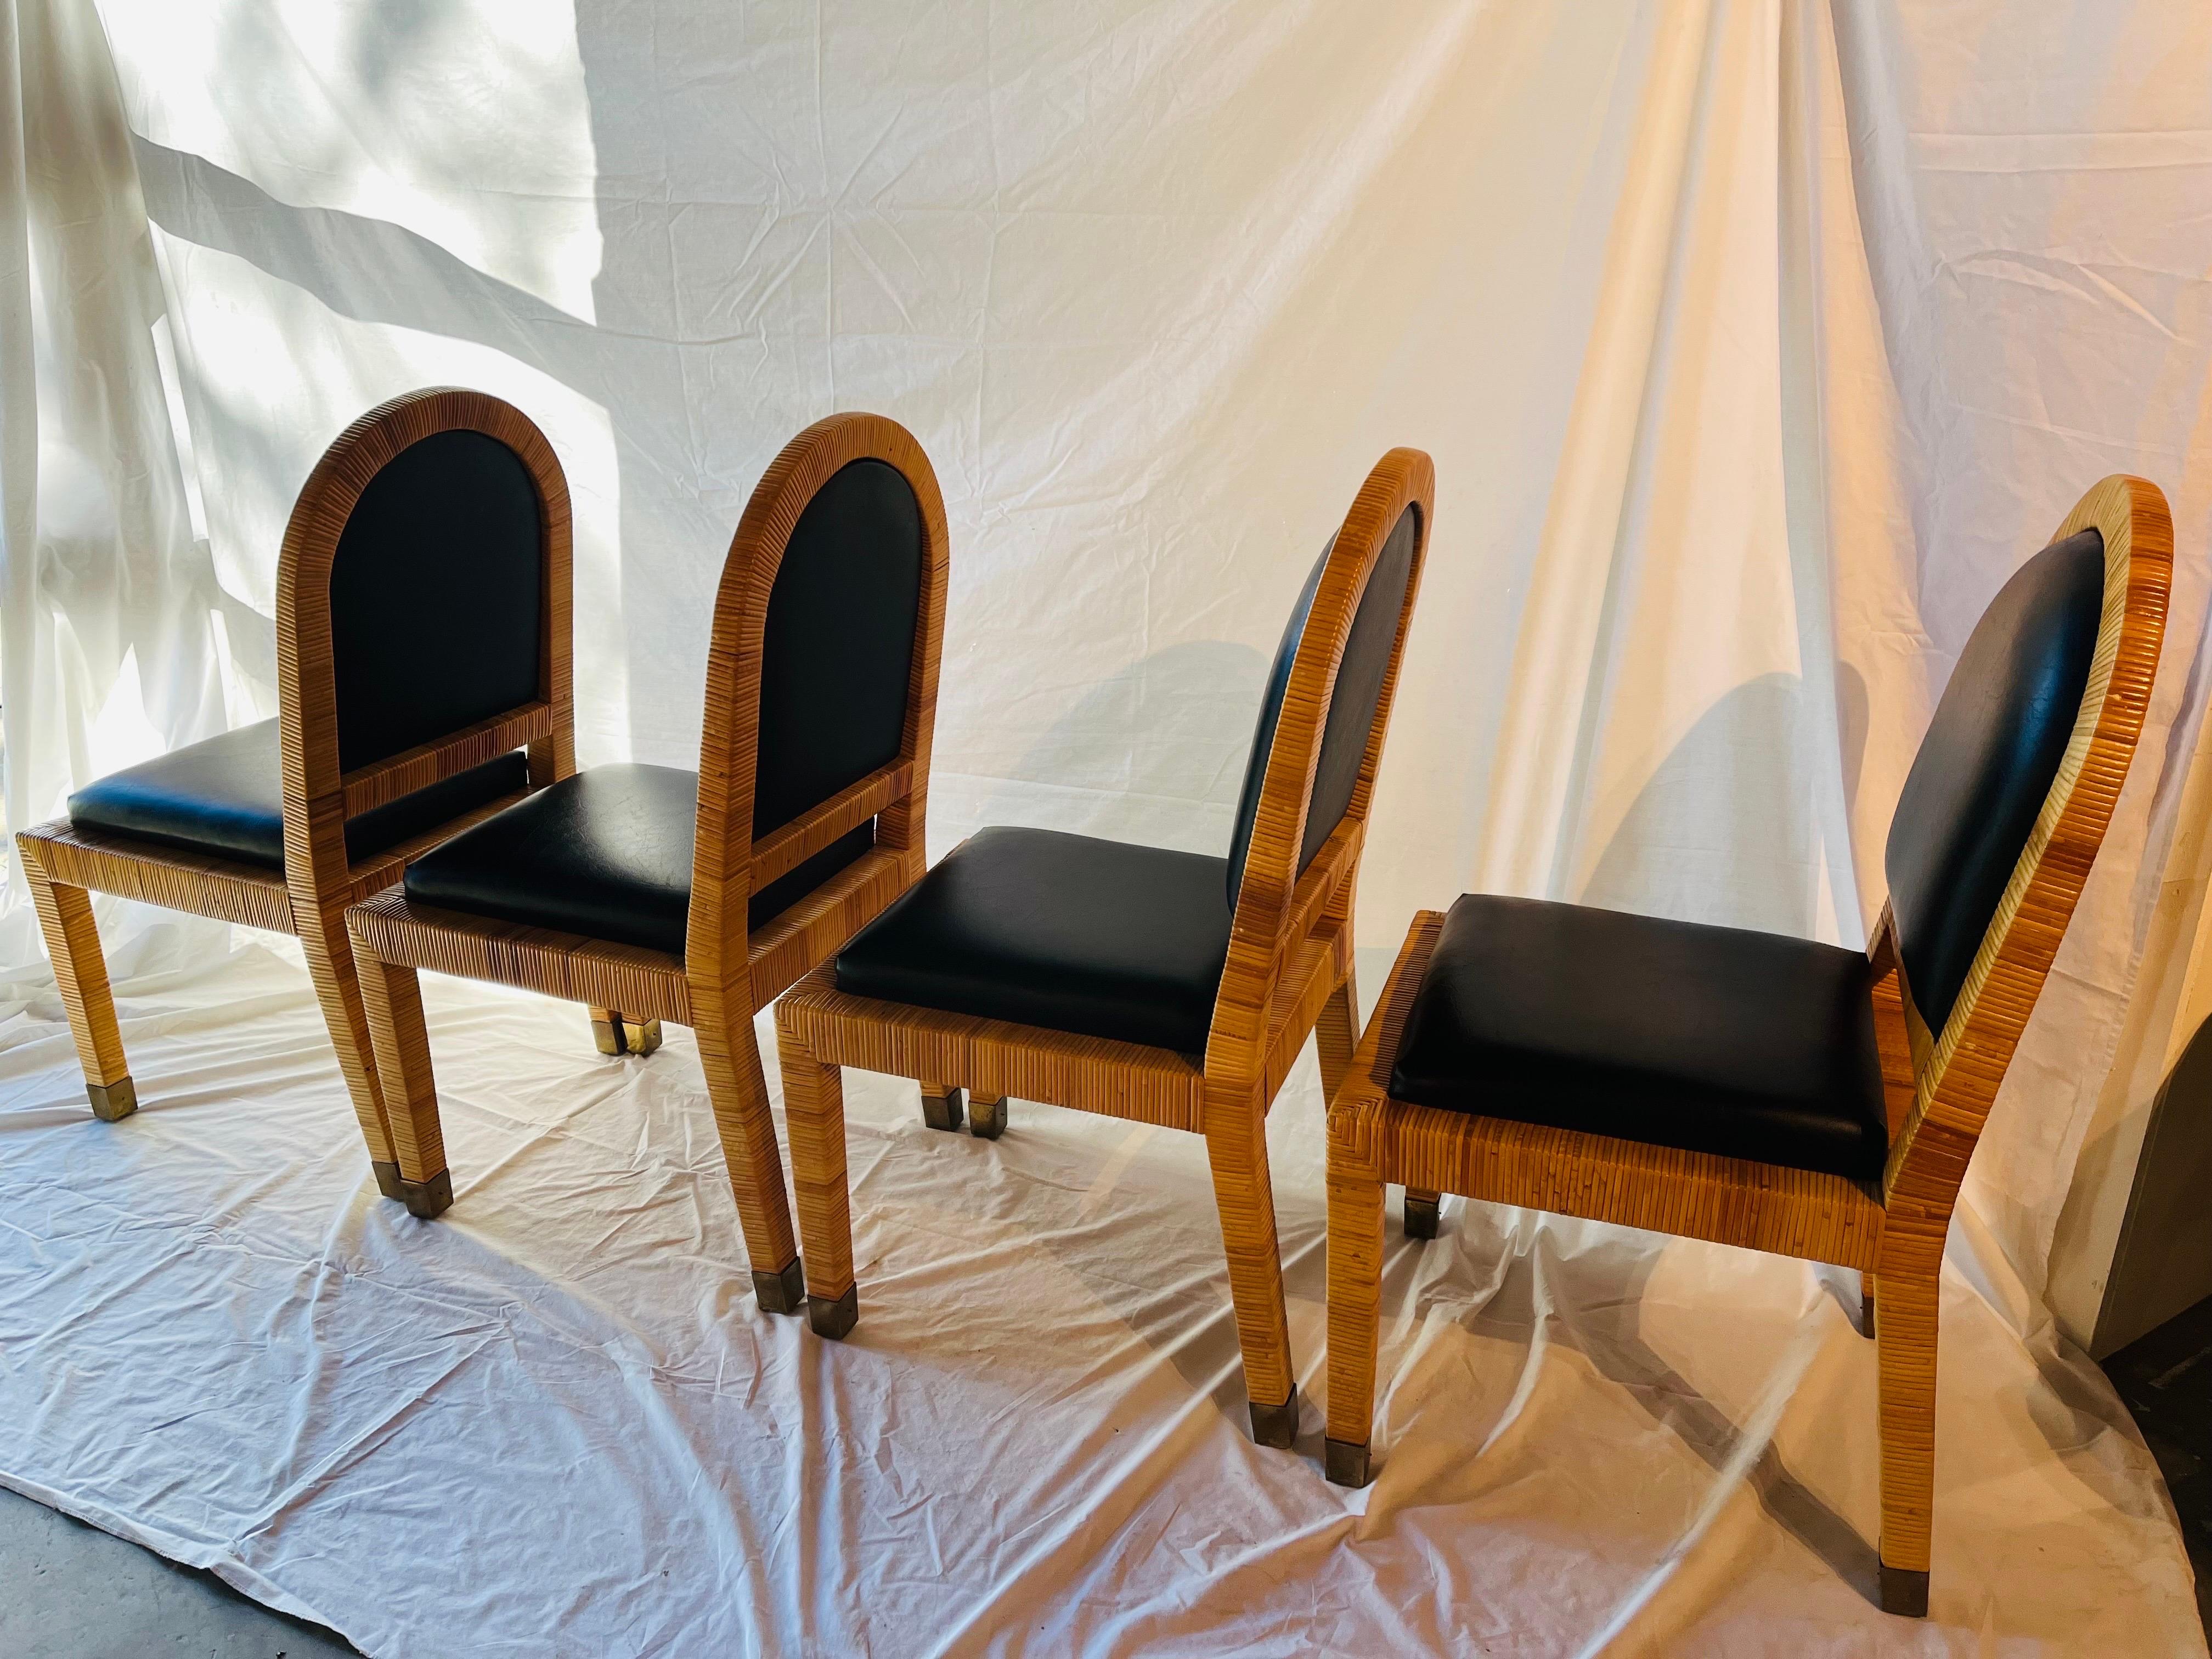 Bielecky Brothers Vintage Rattan Wrapped and Upholstery Set Four Dining Chairs (Quatre chaises de salle à manger) 4